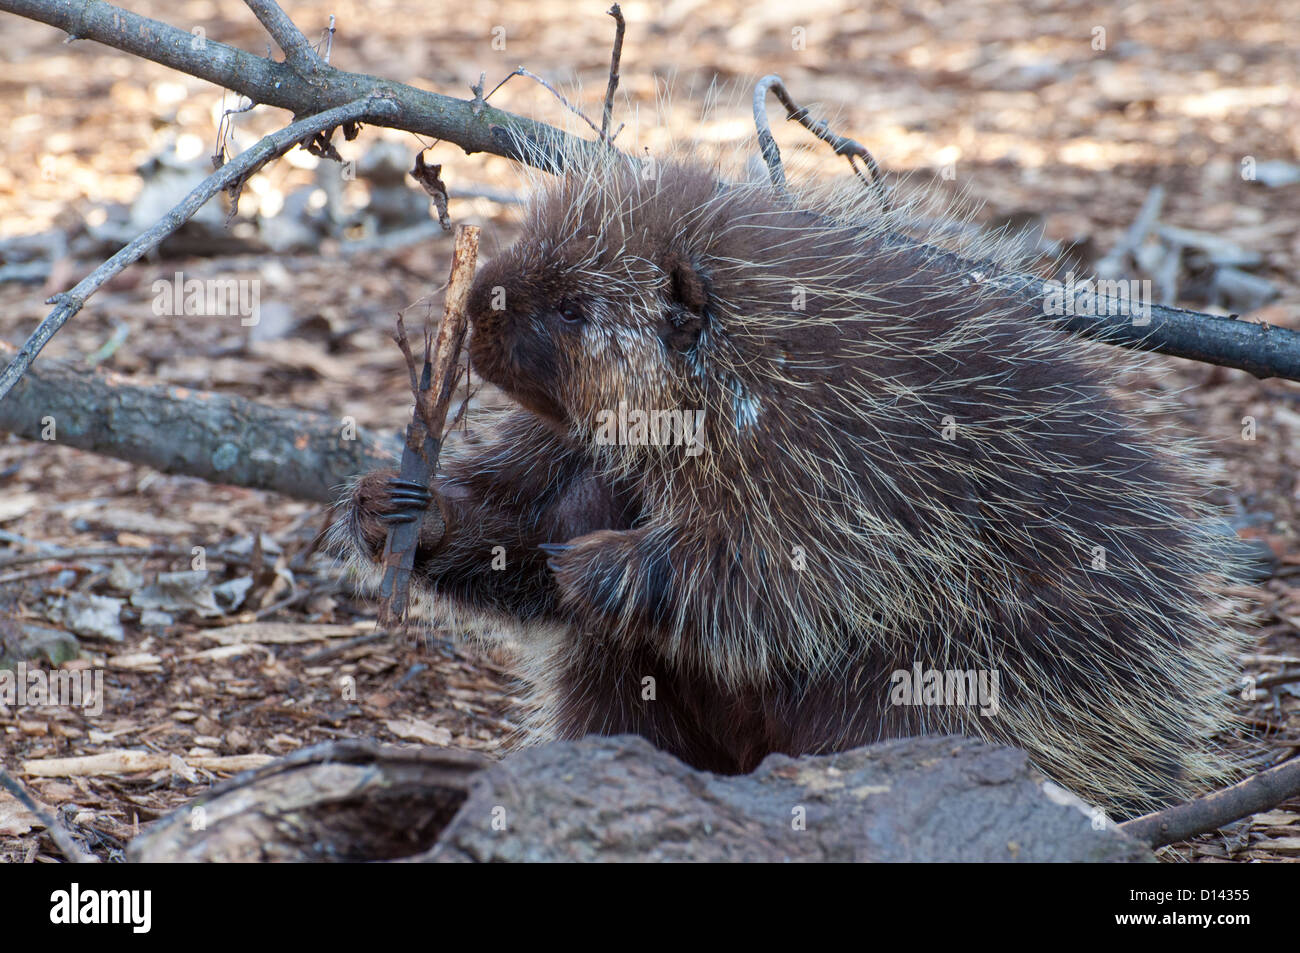 A Common Porcupine chewing on a stick. Stock Photo